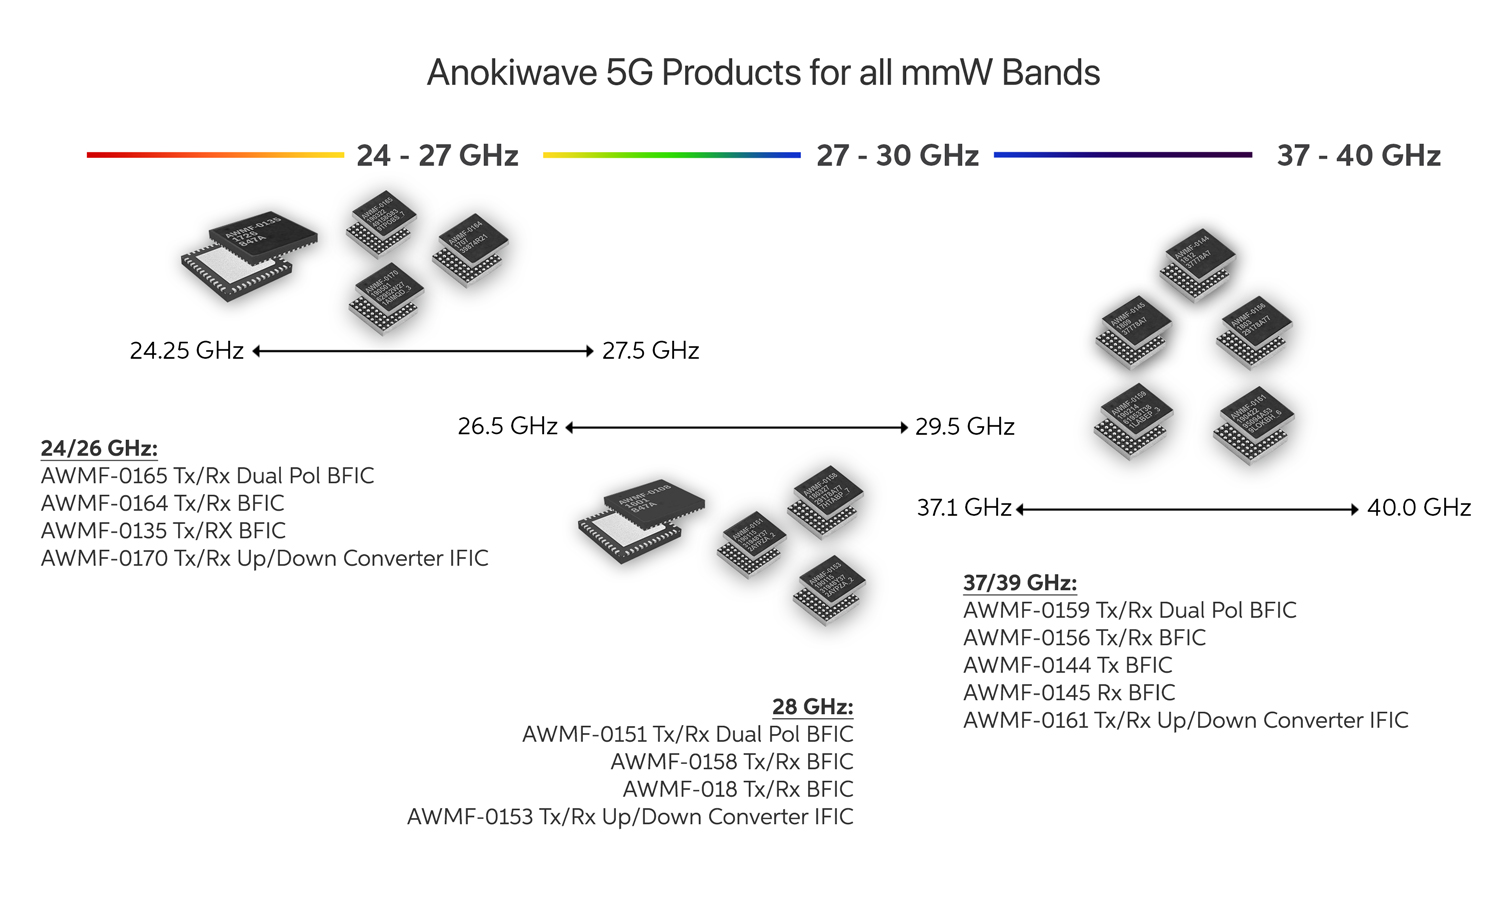 Anokiwave 5G products span the mmW Frequencies